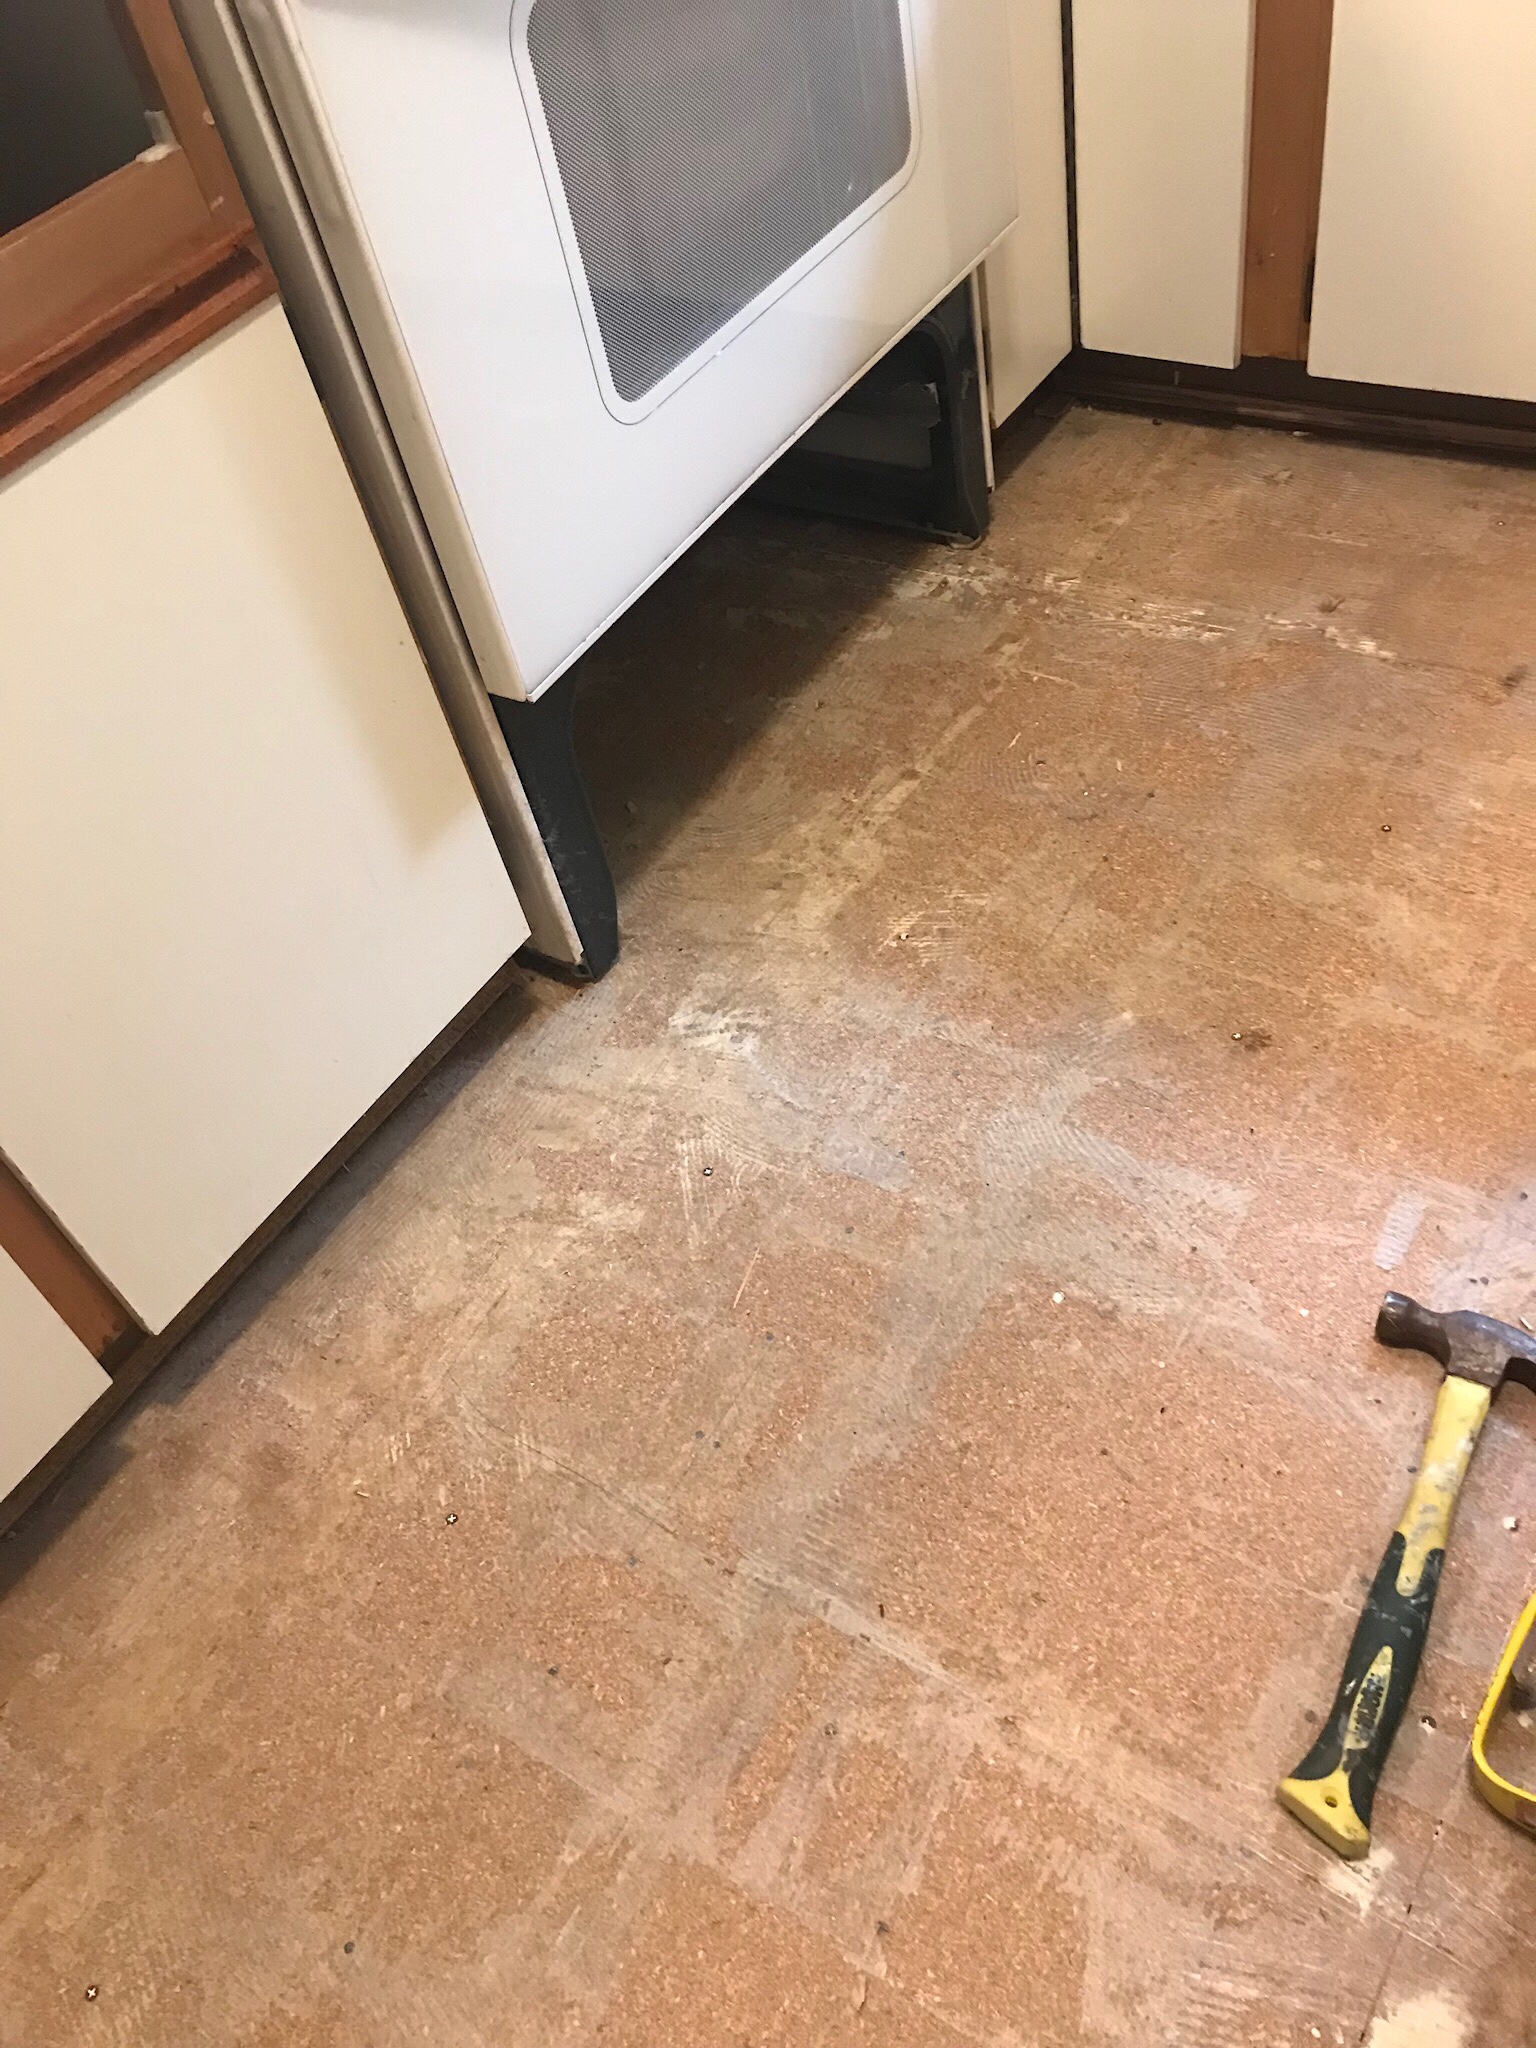 New Kitchen Floor Plywood Plank, How To Tile A Kitchen Floor On Plywood